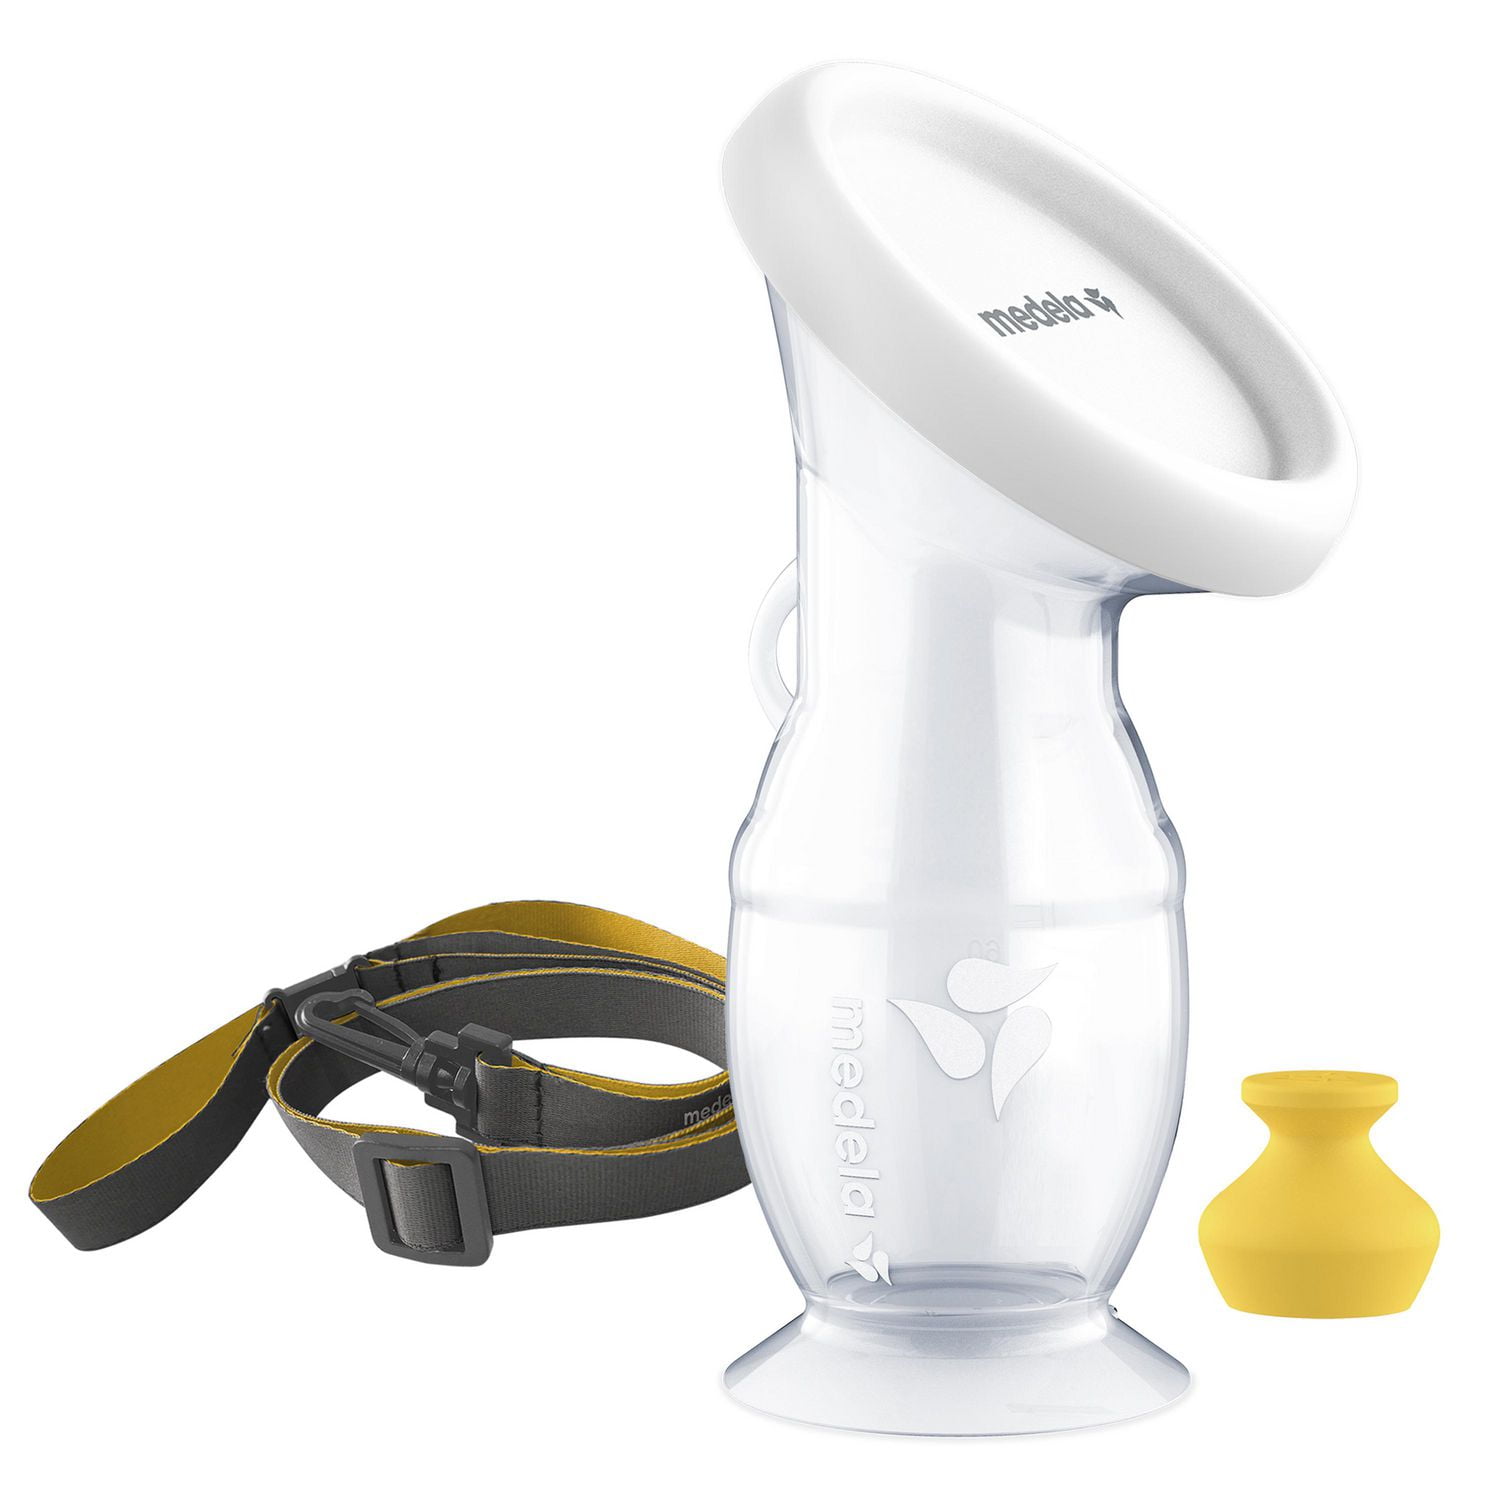 Momcozy M5 Hands Free Breast Pump, Wearable Breast Pump with 3 Modes & 9  Levels